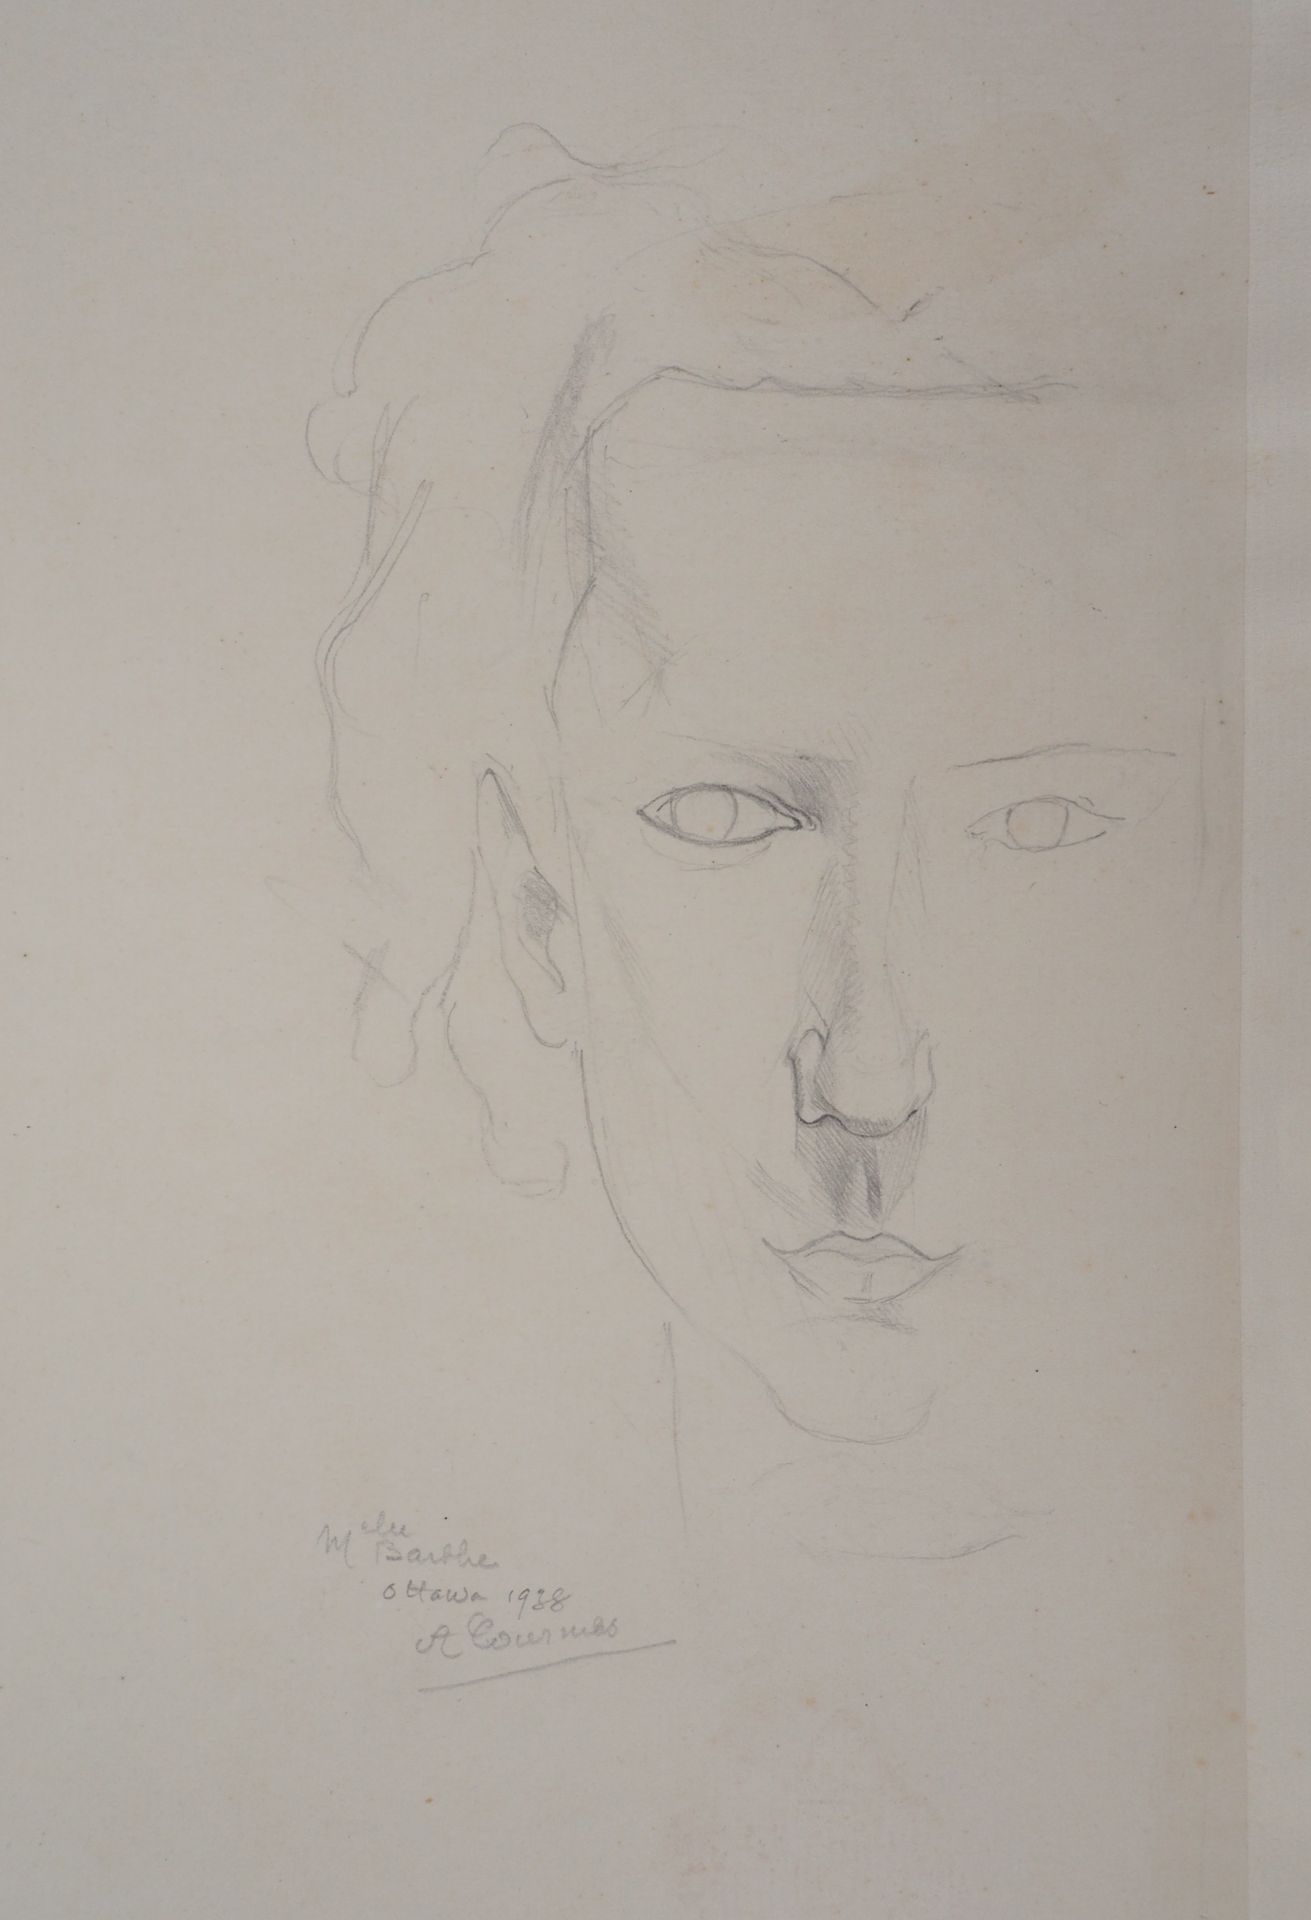 Alfred COURMES Alfred COURMES (1898-1993)

Volto di donna, 1938

Disegno a matit&hellip;